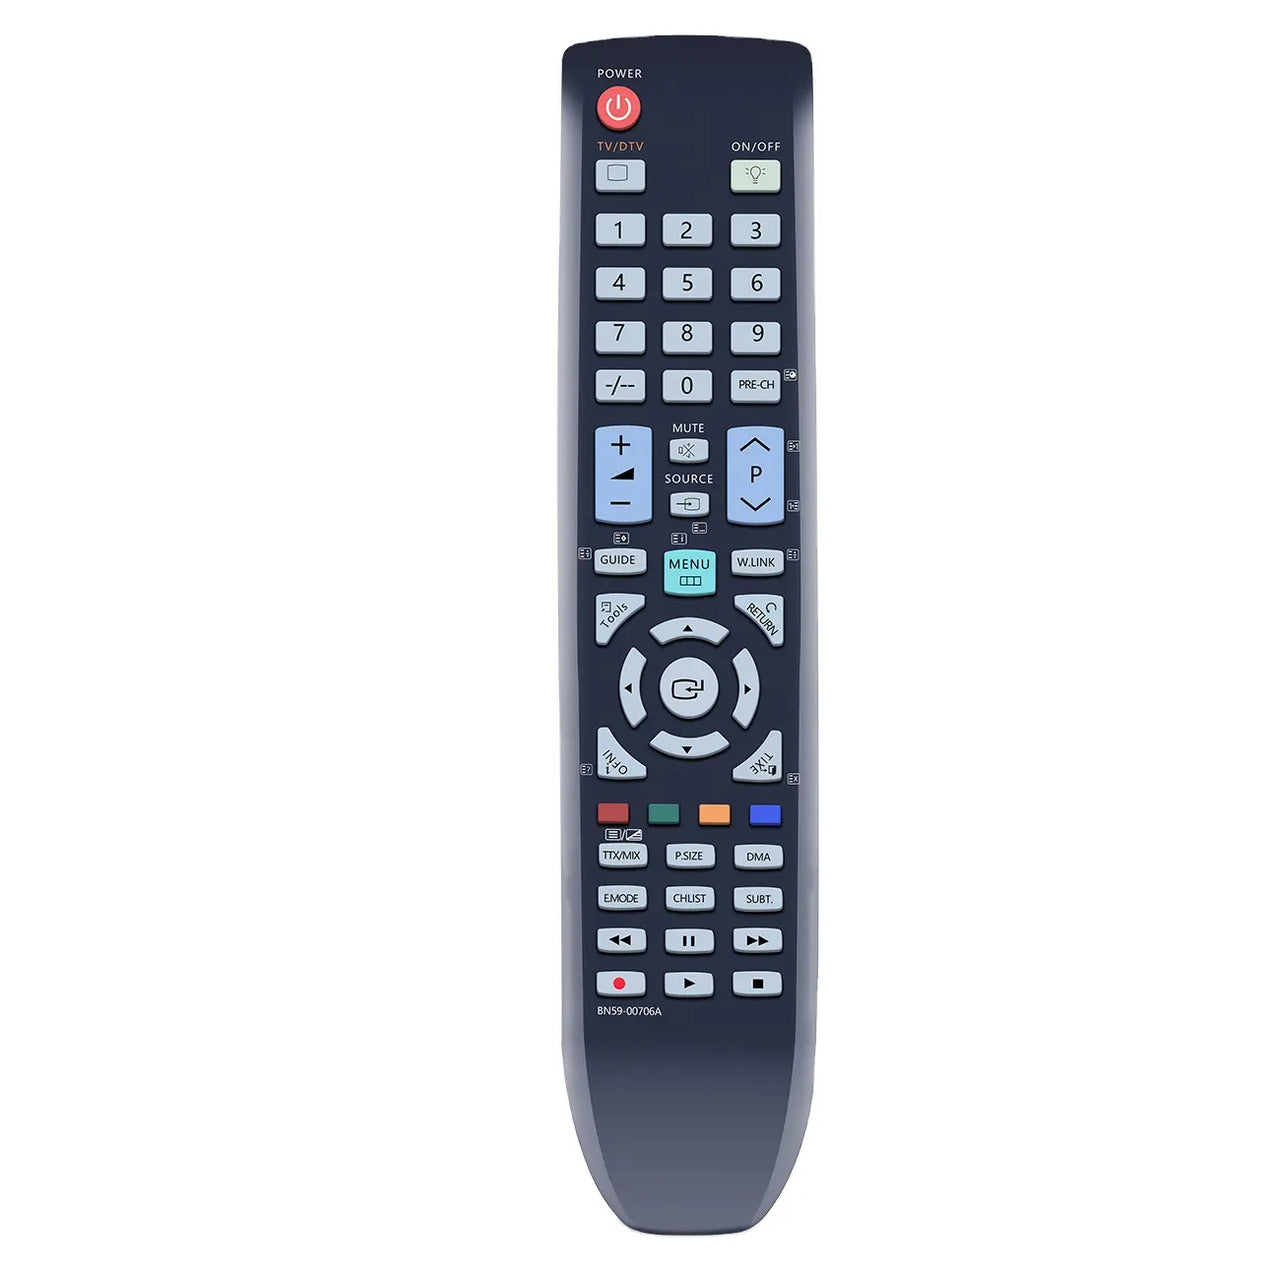 BN59-00706A Replacement Remote for Samsung Televisions